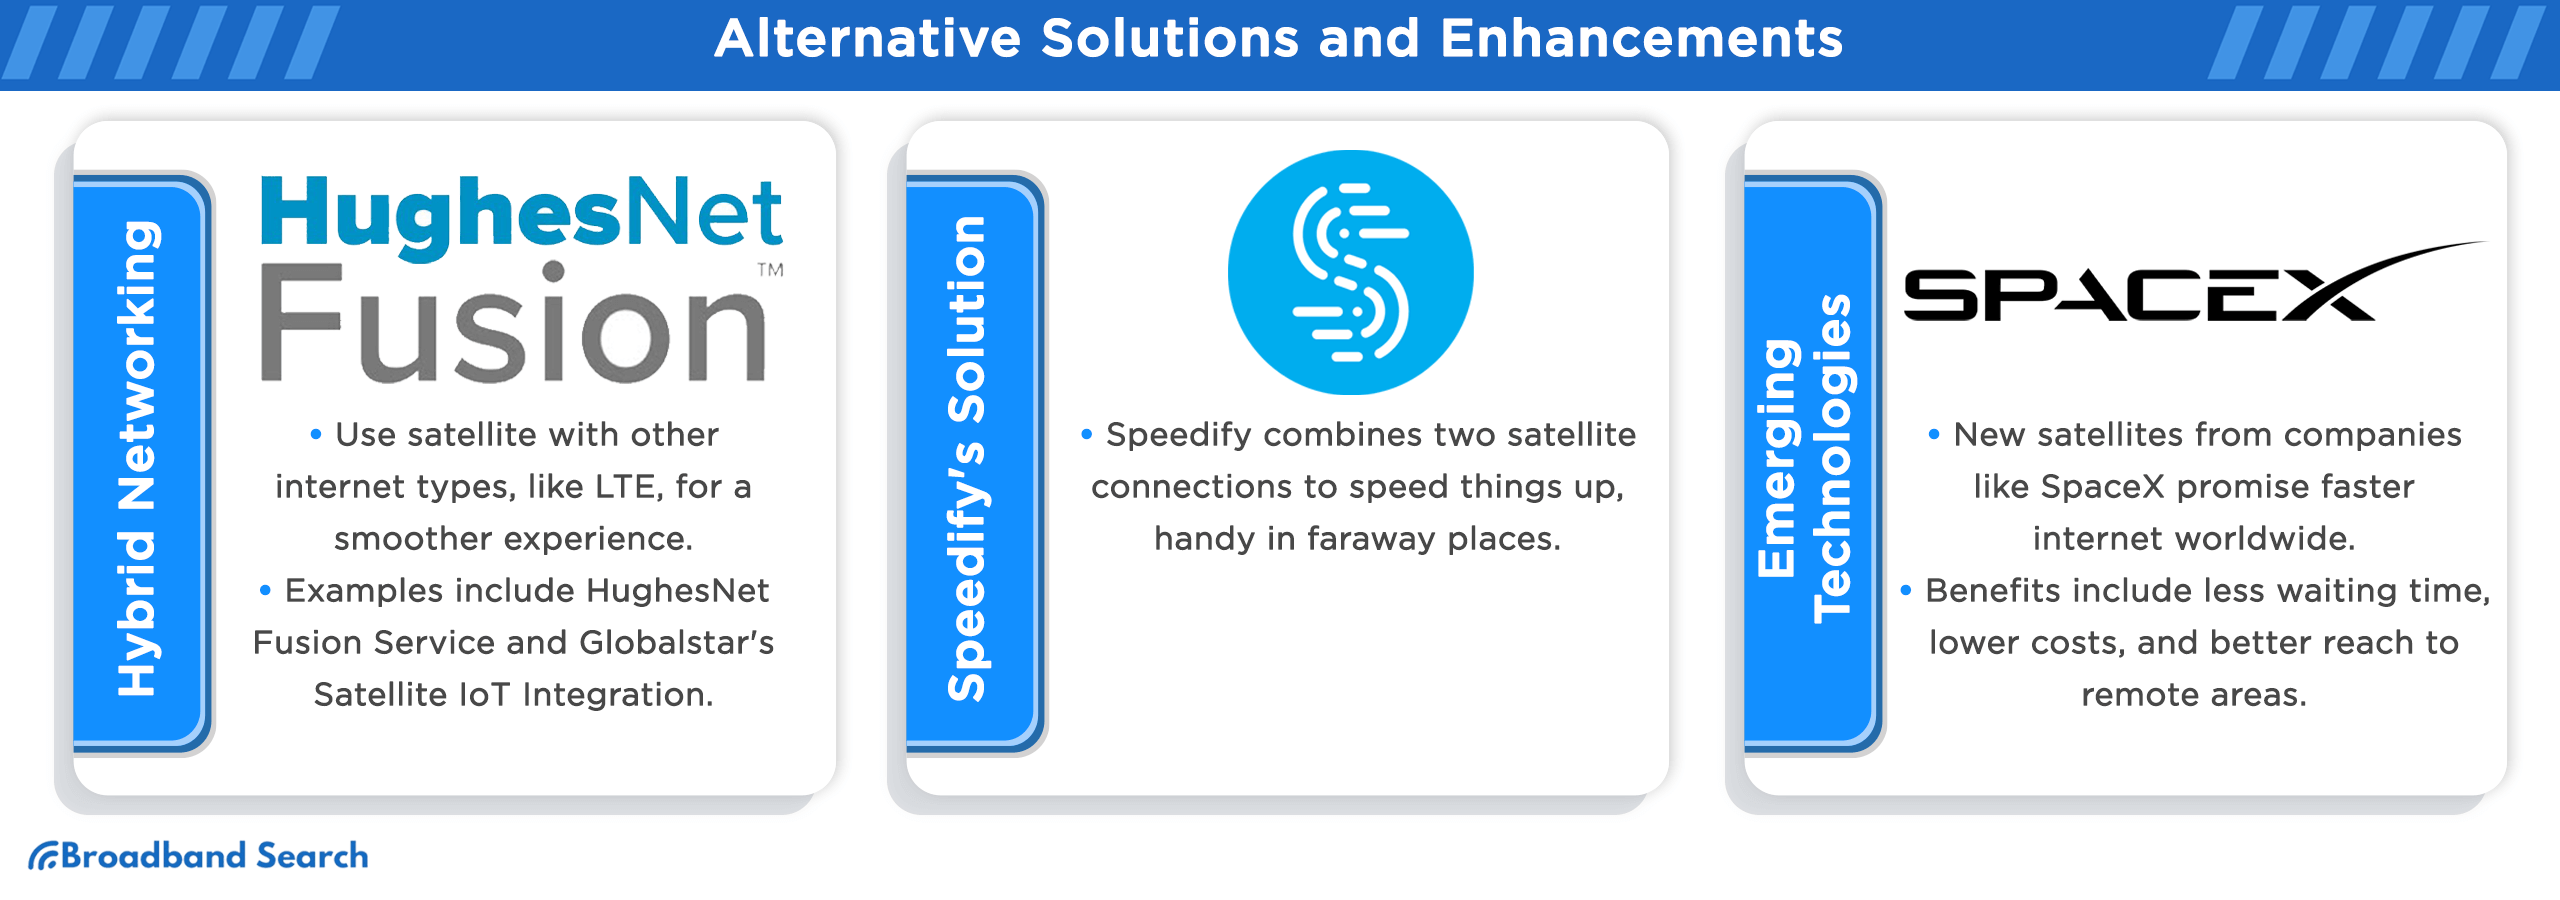 Alternative solutions and enhancements